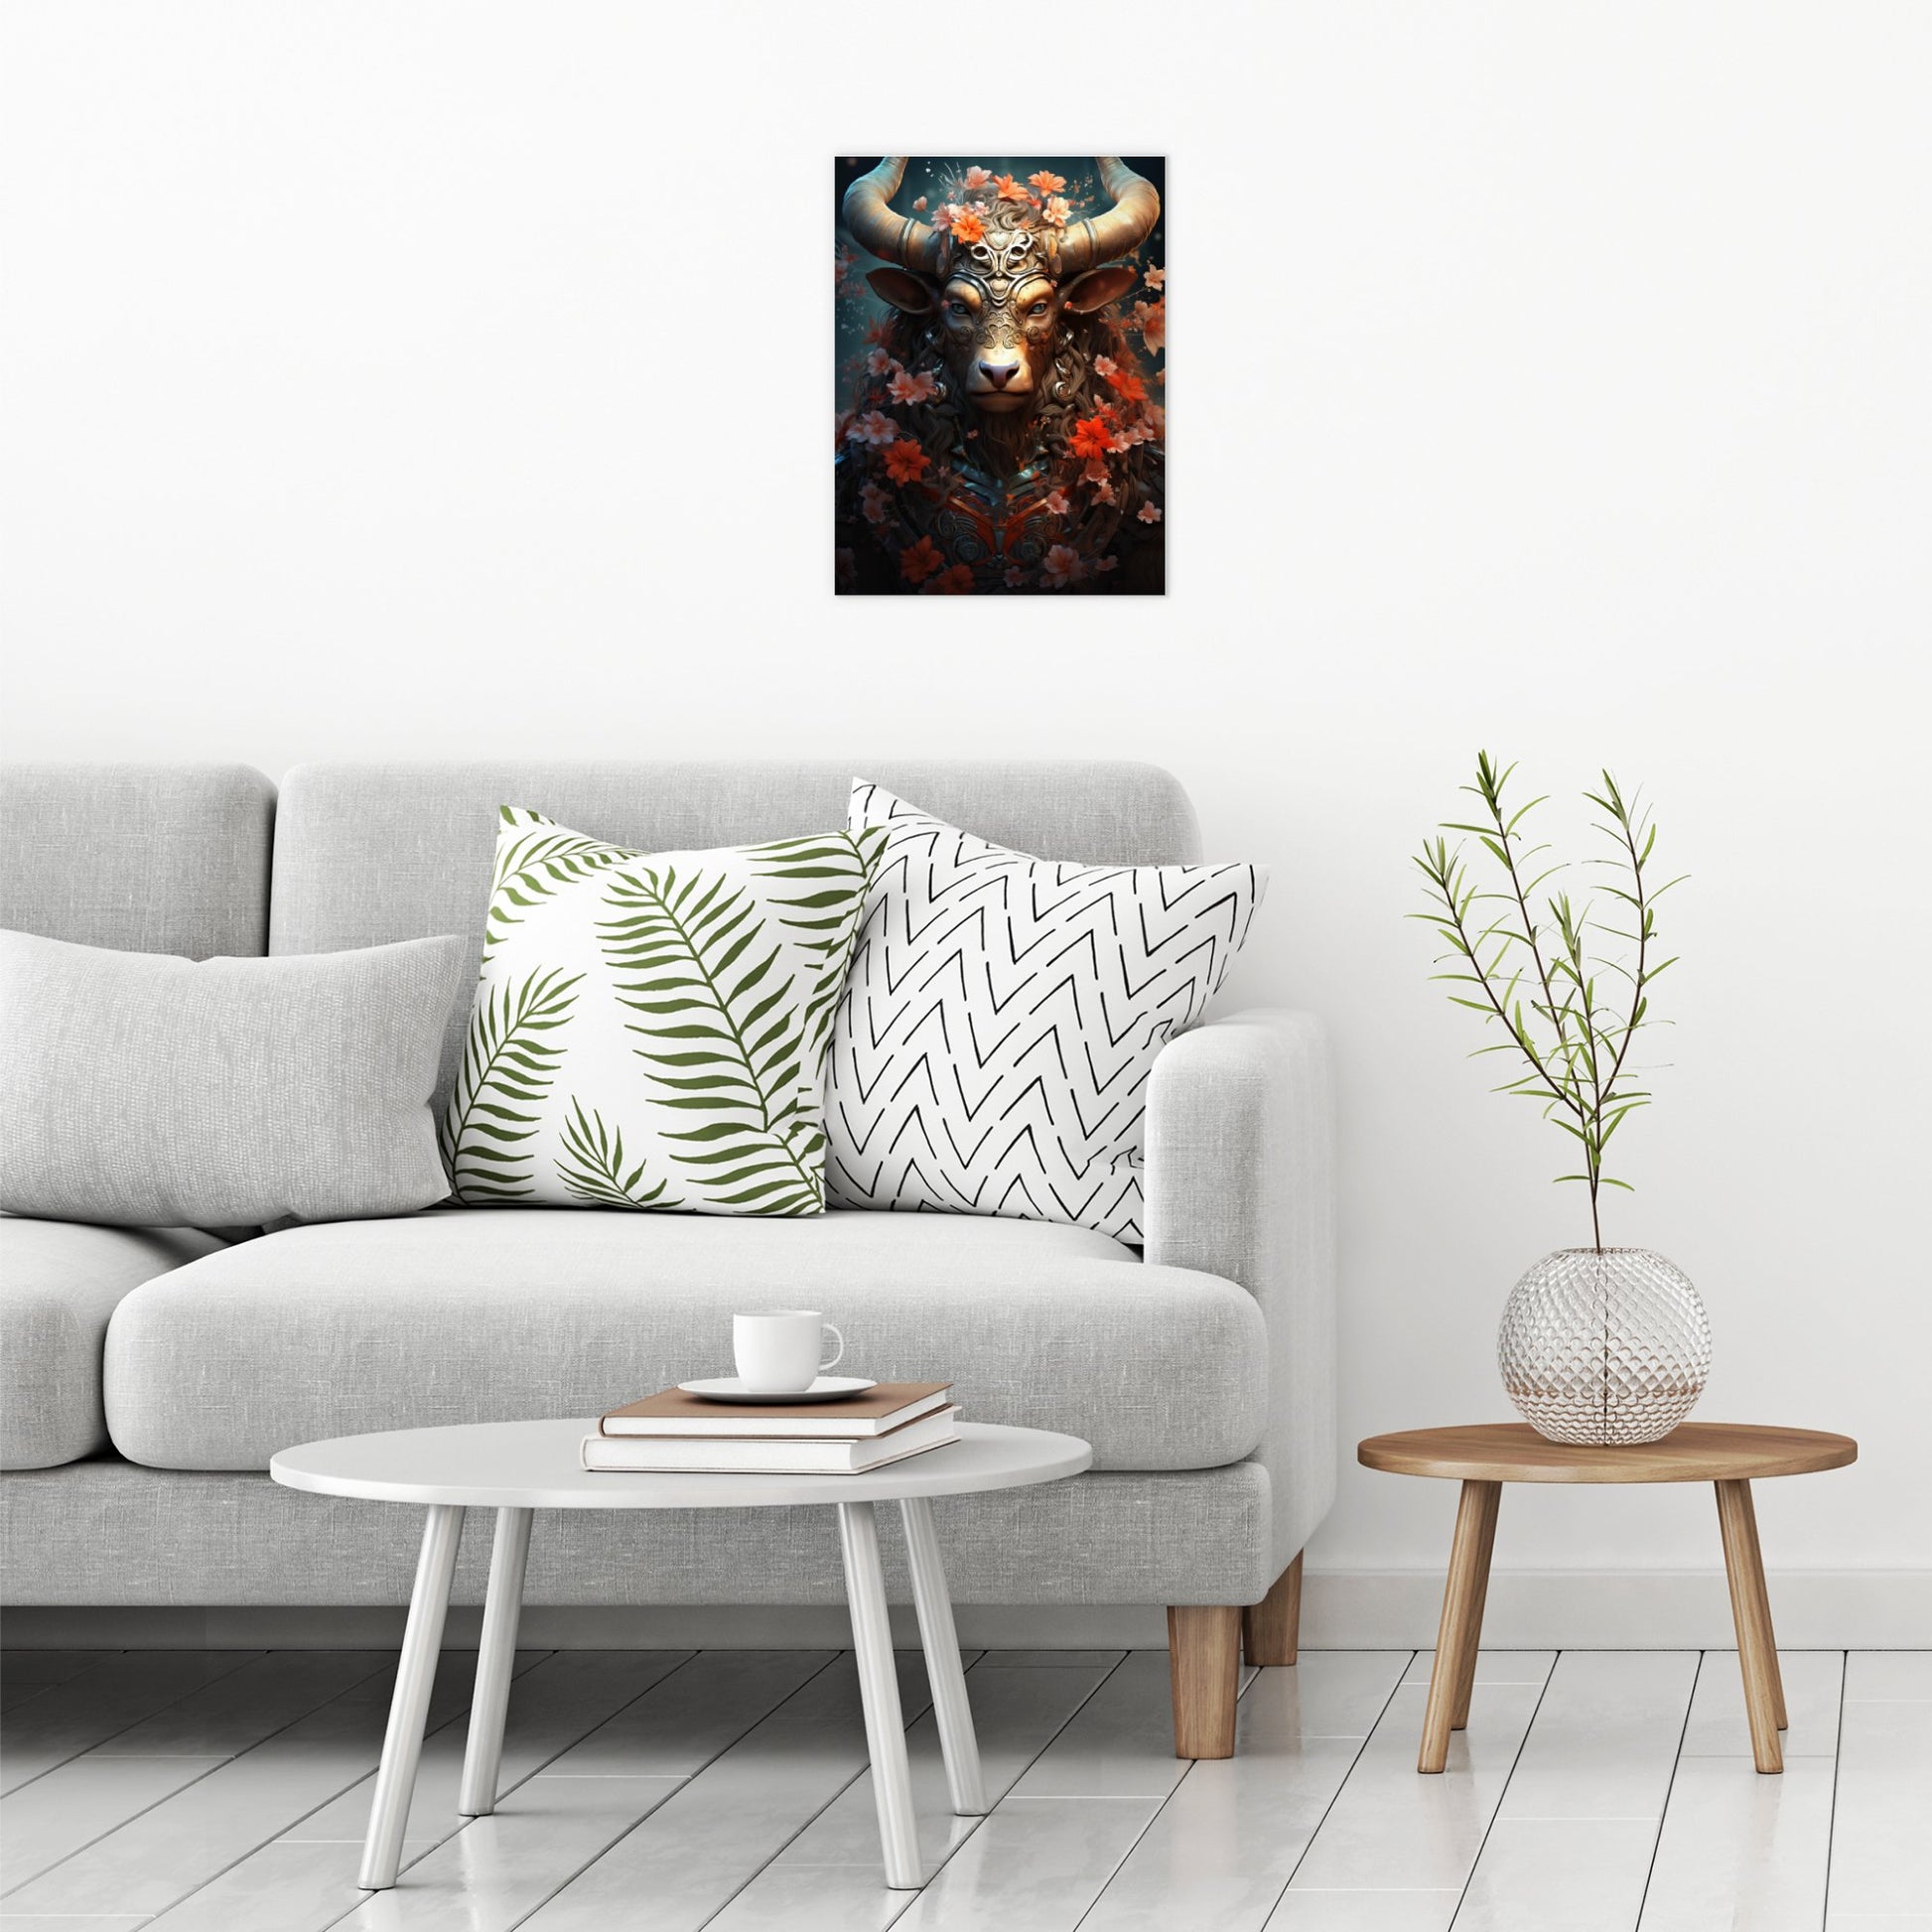 A contemporary modern room view showing a medium size metal art poster display plate with printed design of a Magical Minotaur Fantasy Painting